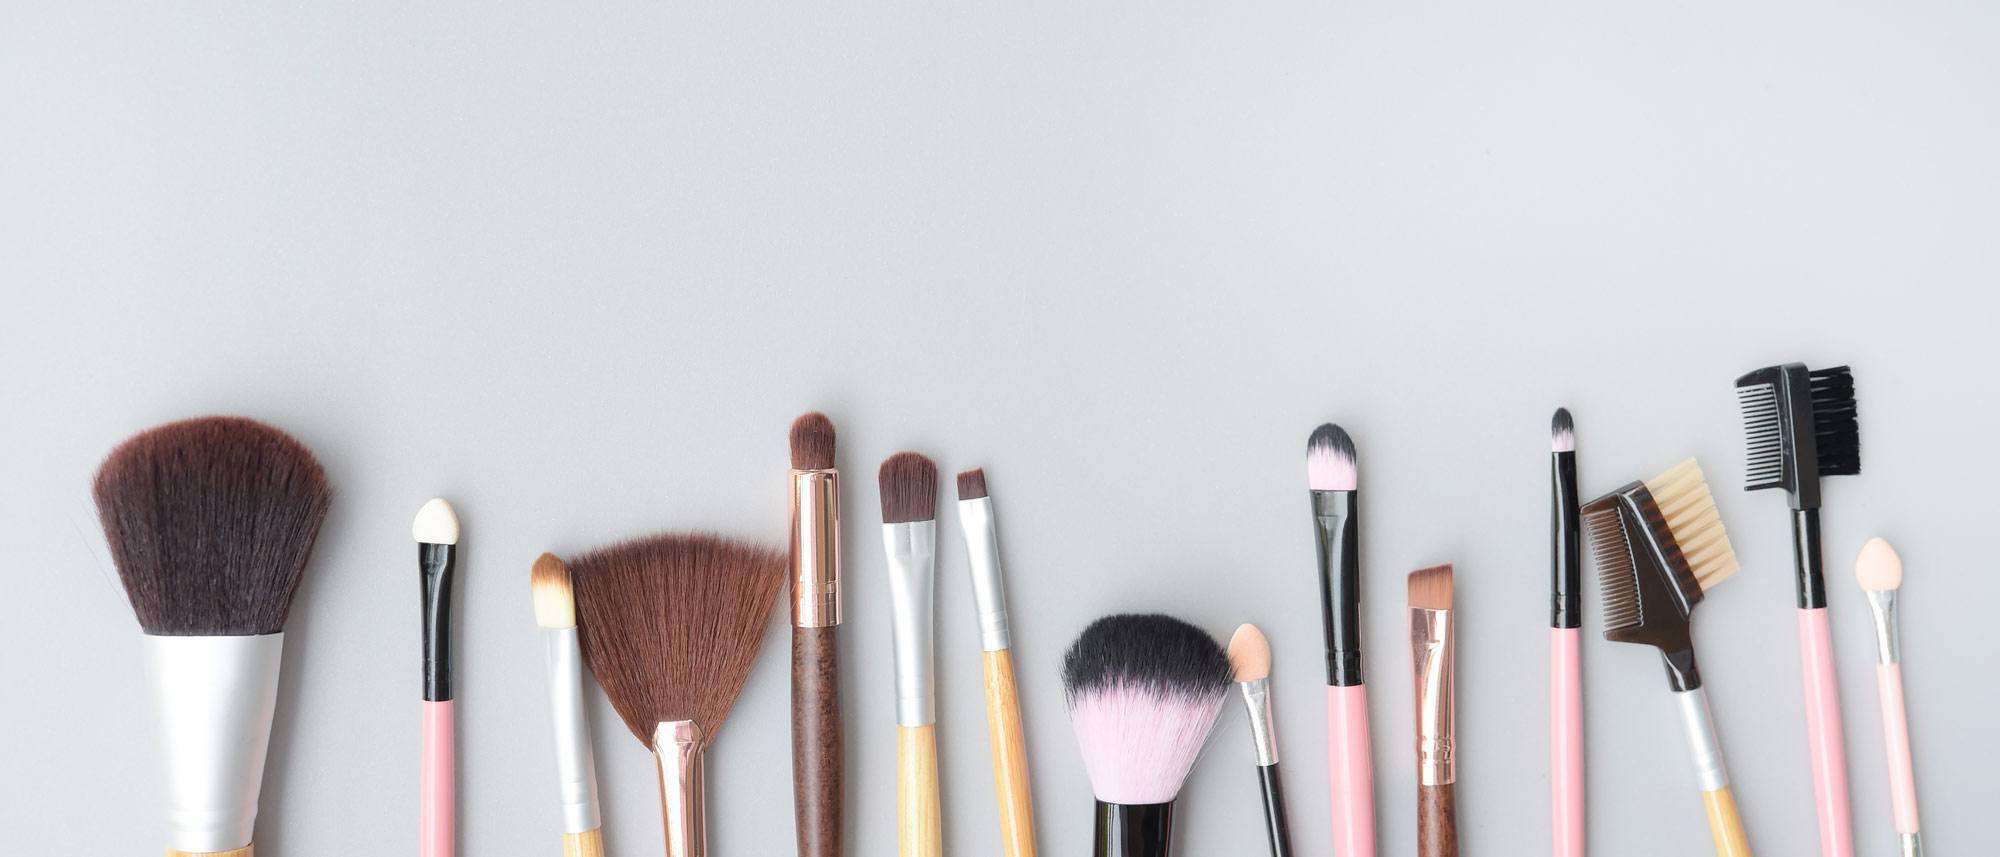 Confused about which Makeup Brushes do what? Get the 411 on their names and uses here